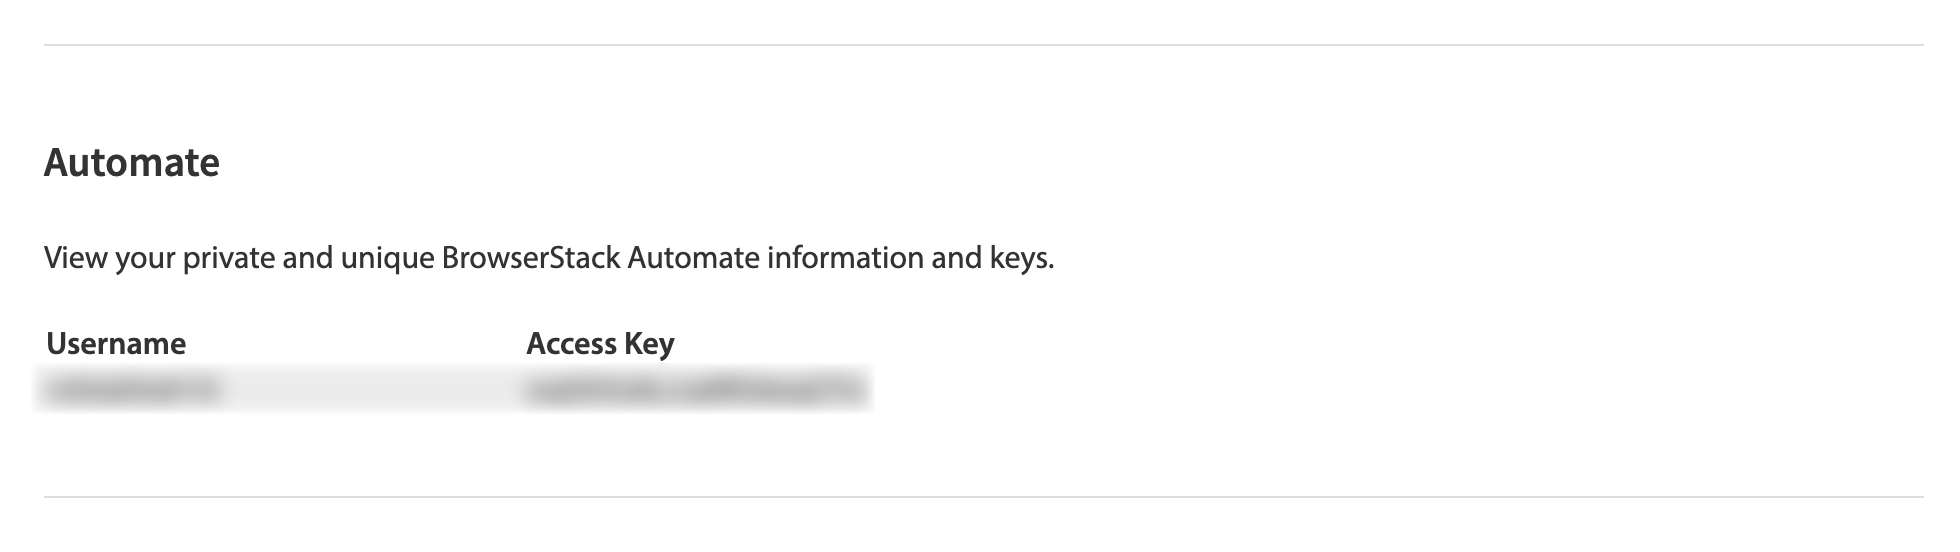 Getting access key for Local Console